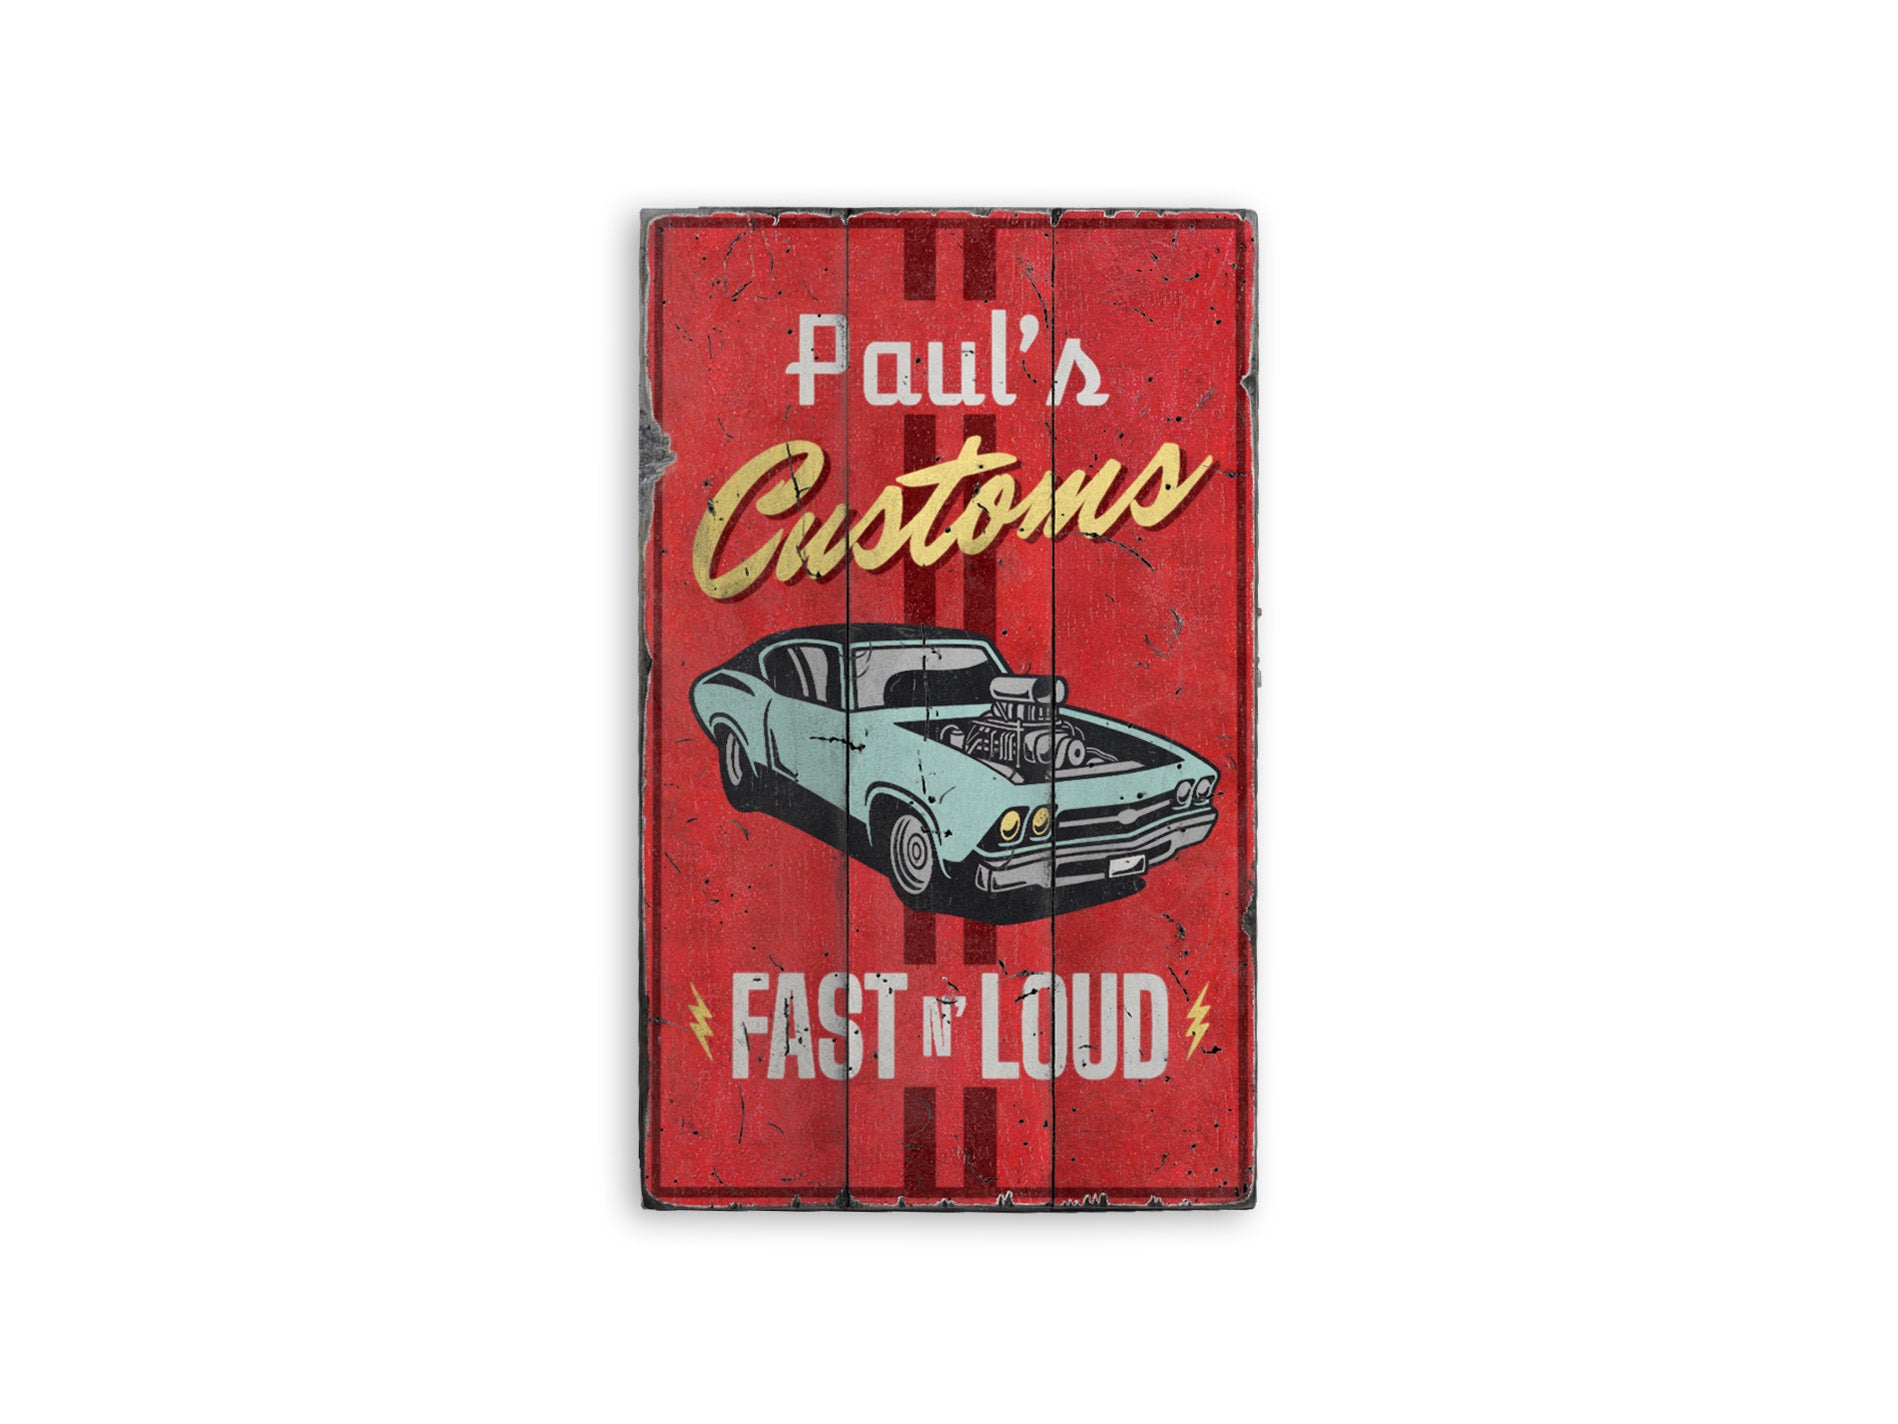 Fast and Loud Customs Rustic Wood Sign